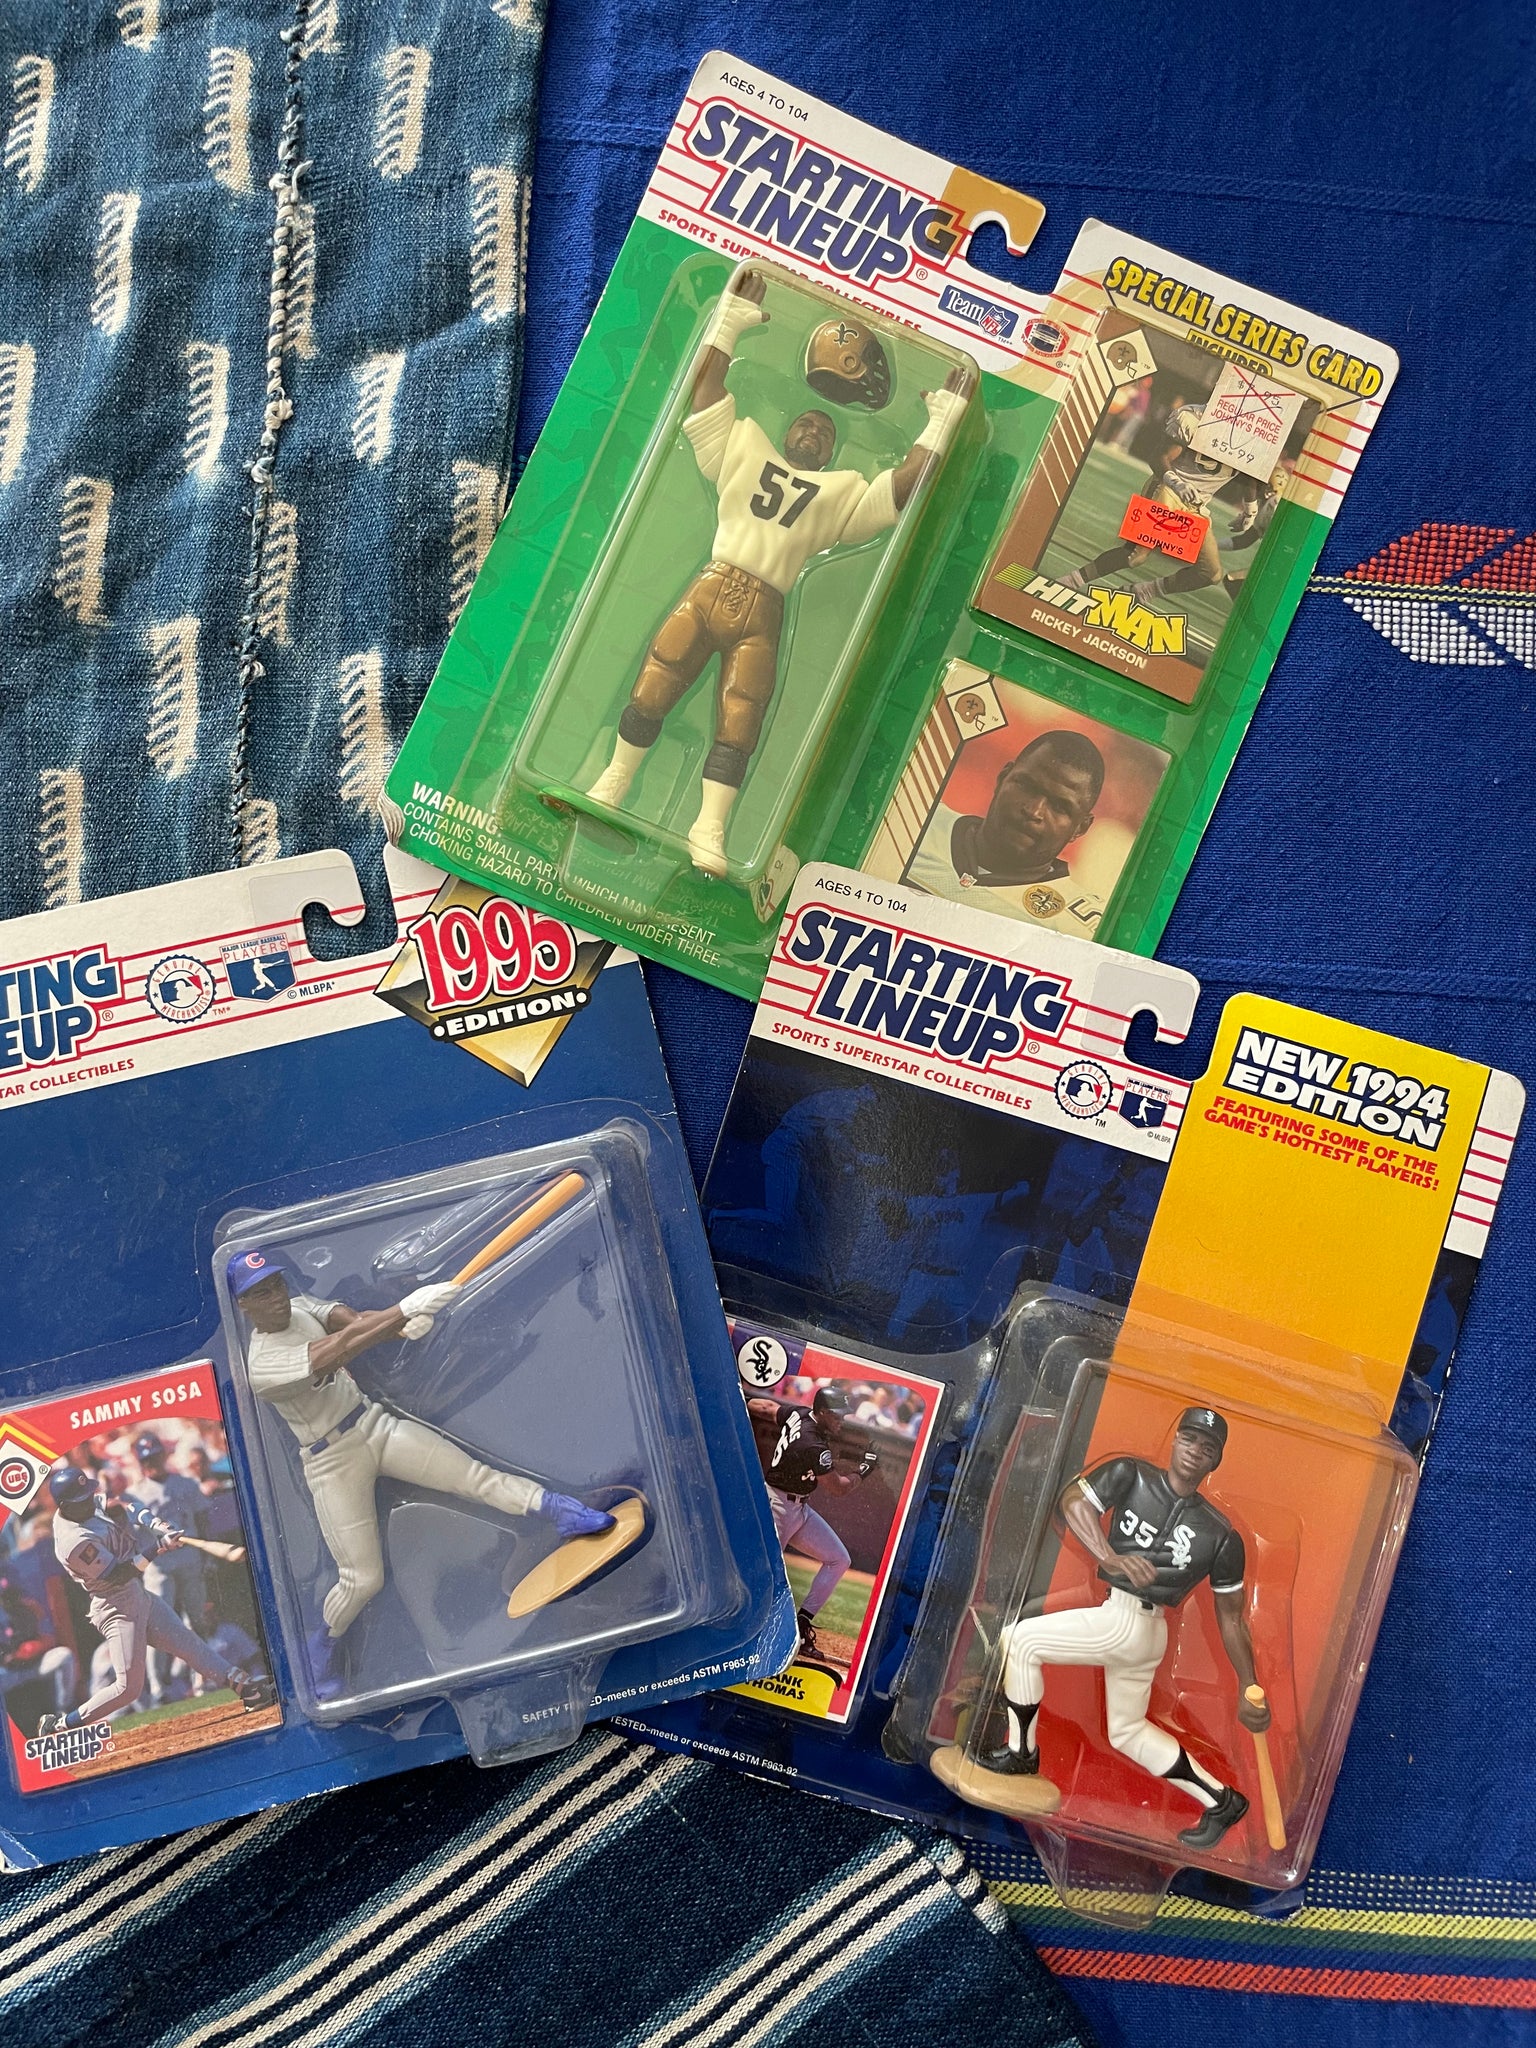 Vintage Starting Lineup Toys// Assorted Players (1990’s)